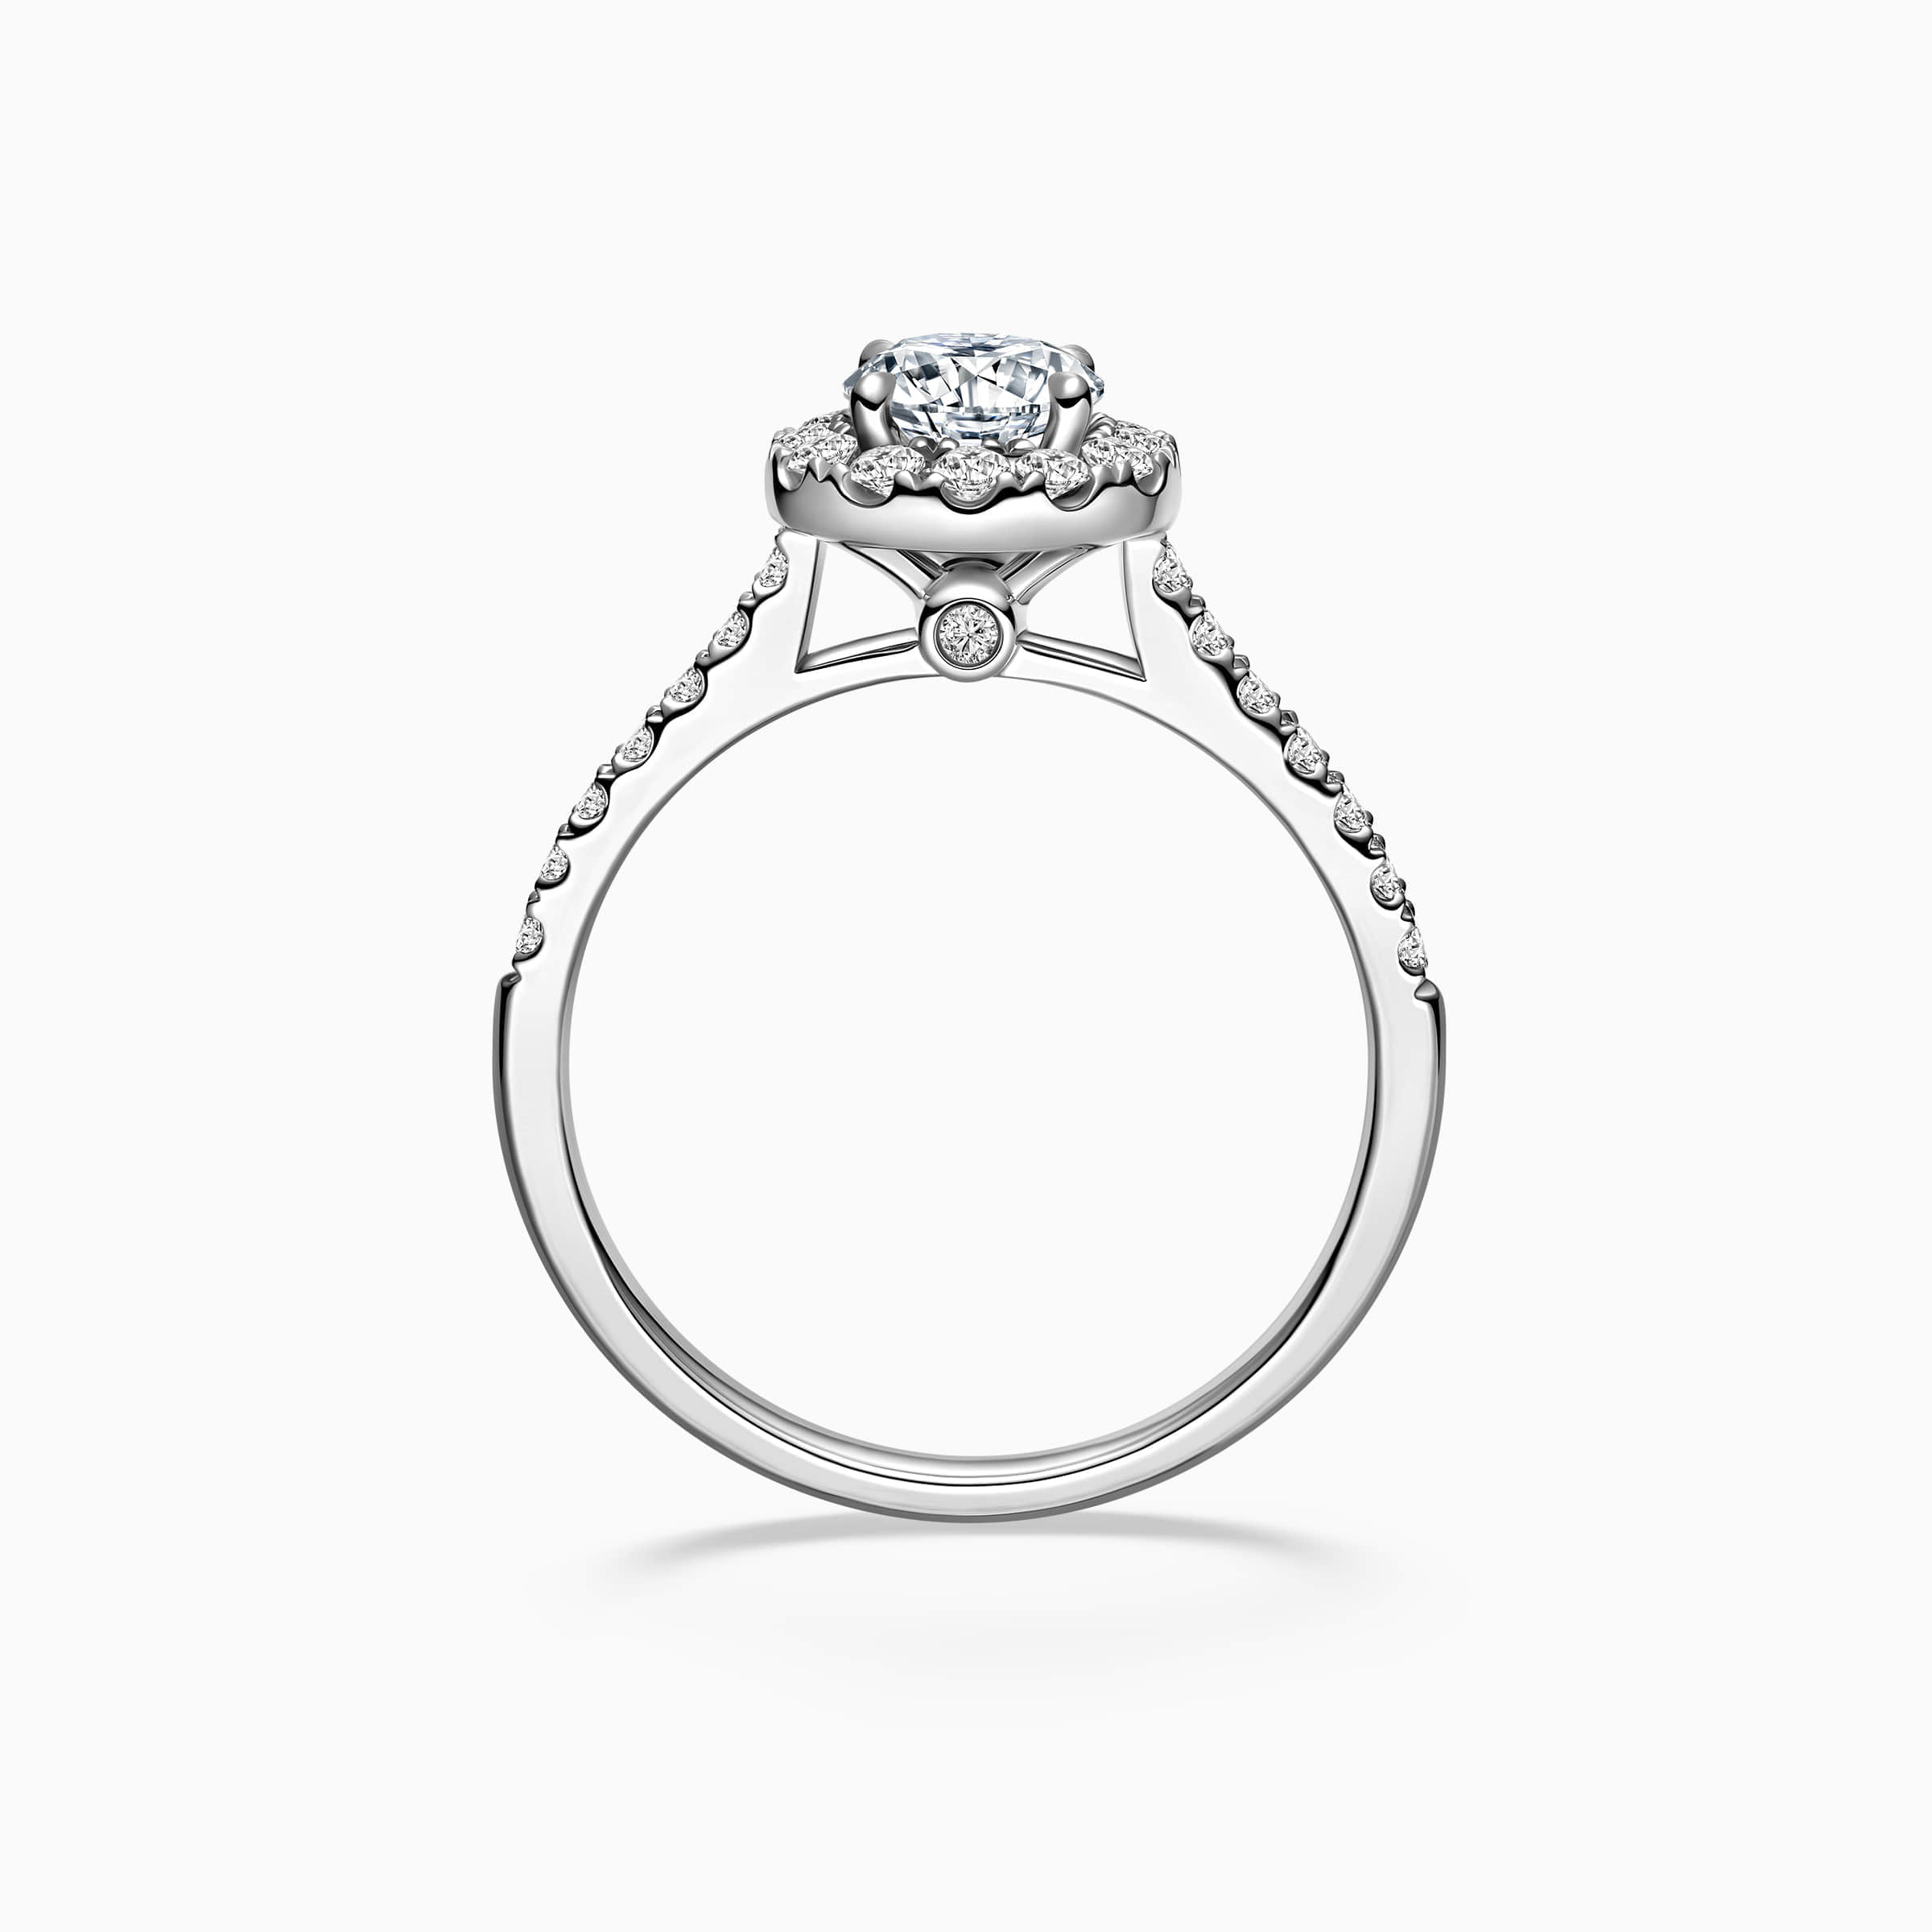 Darry Ring round halo engagement ring side view